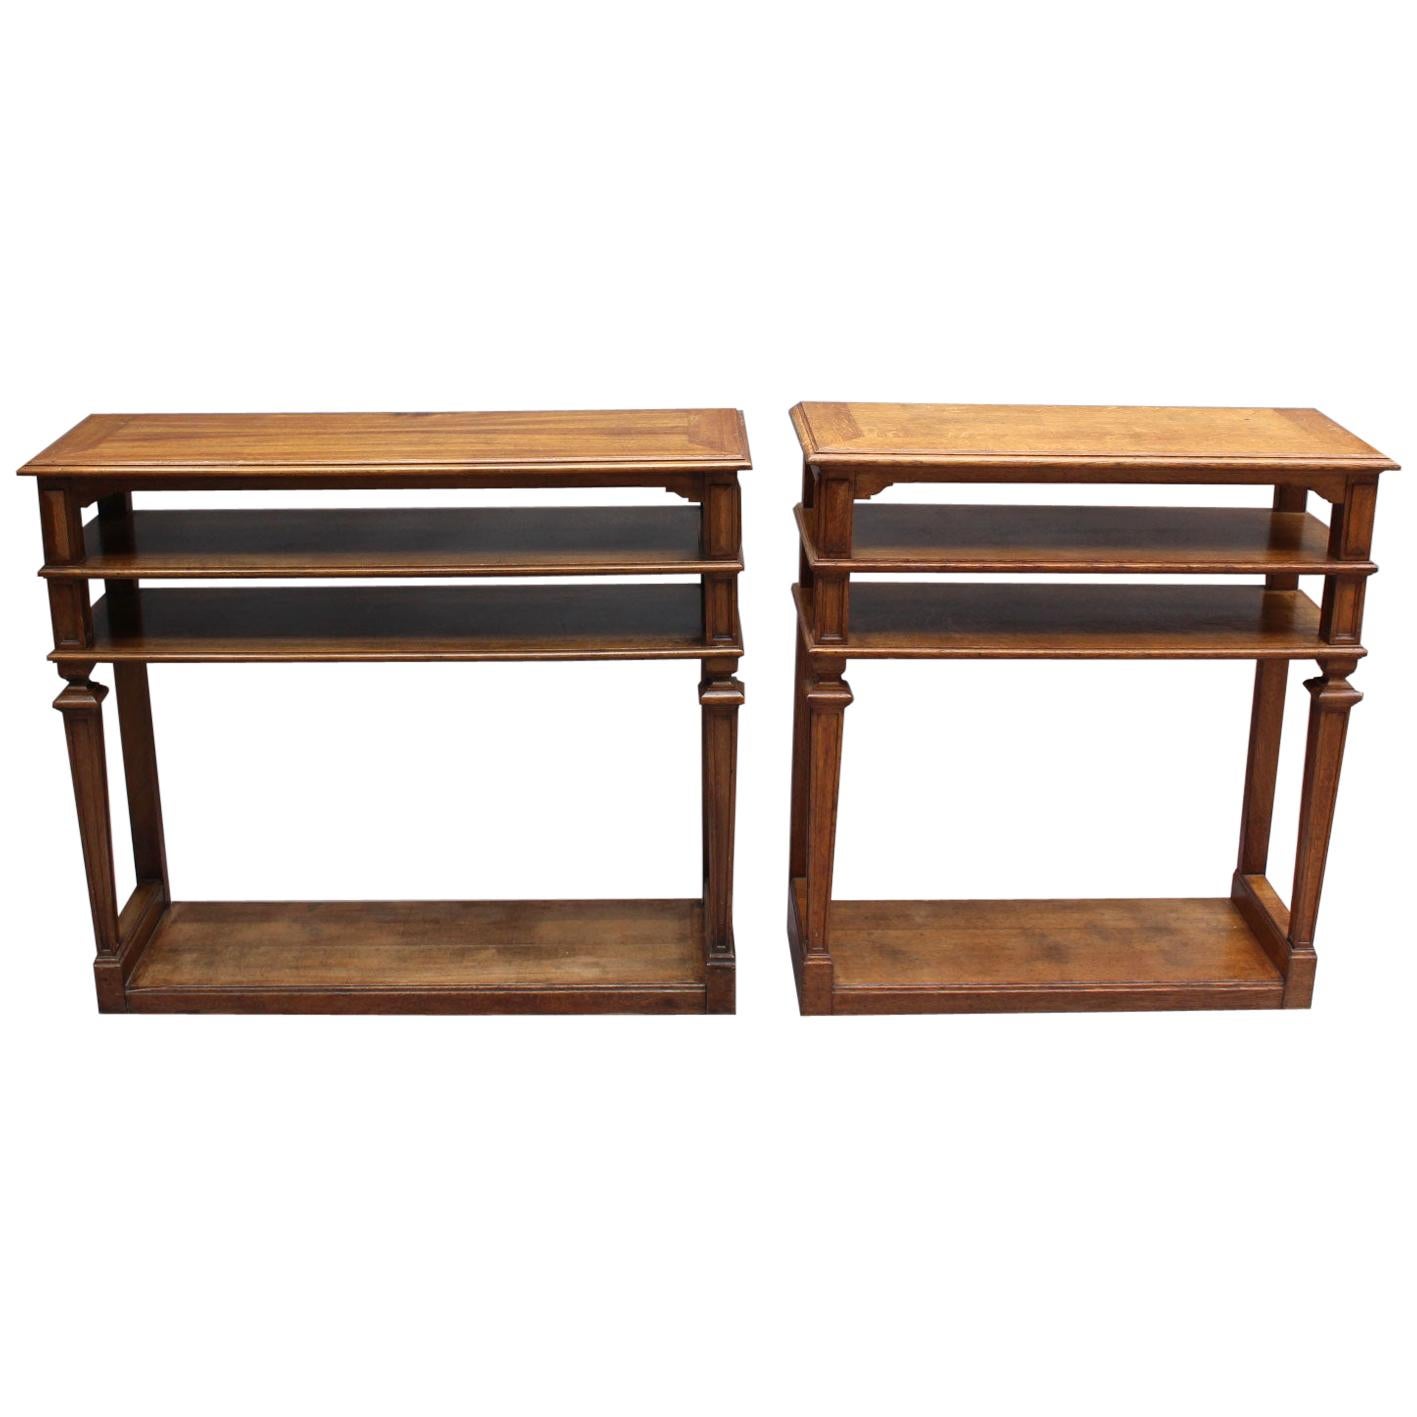 2 French Neoclassical 4-Tiered Console/Sofa Tables